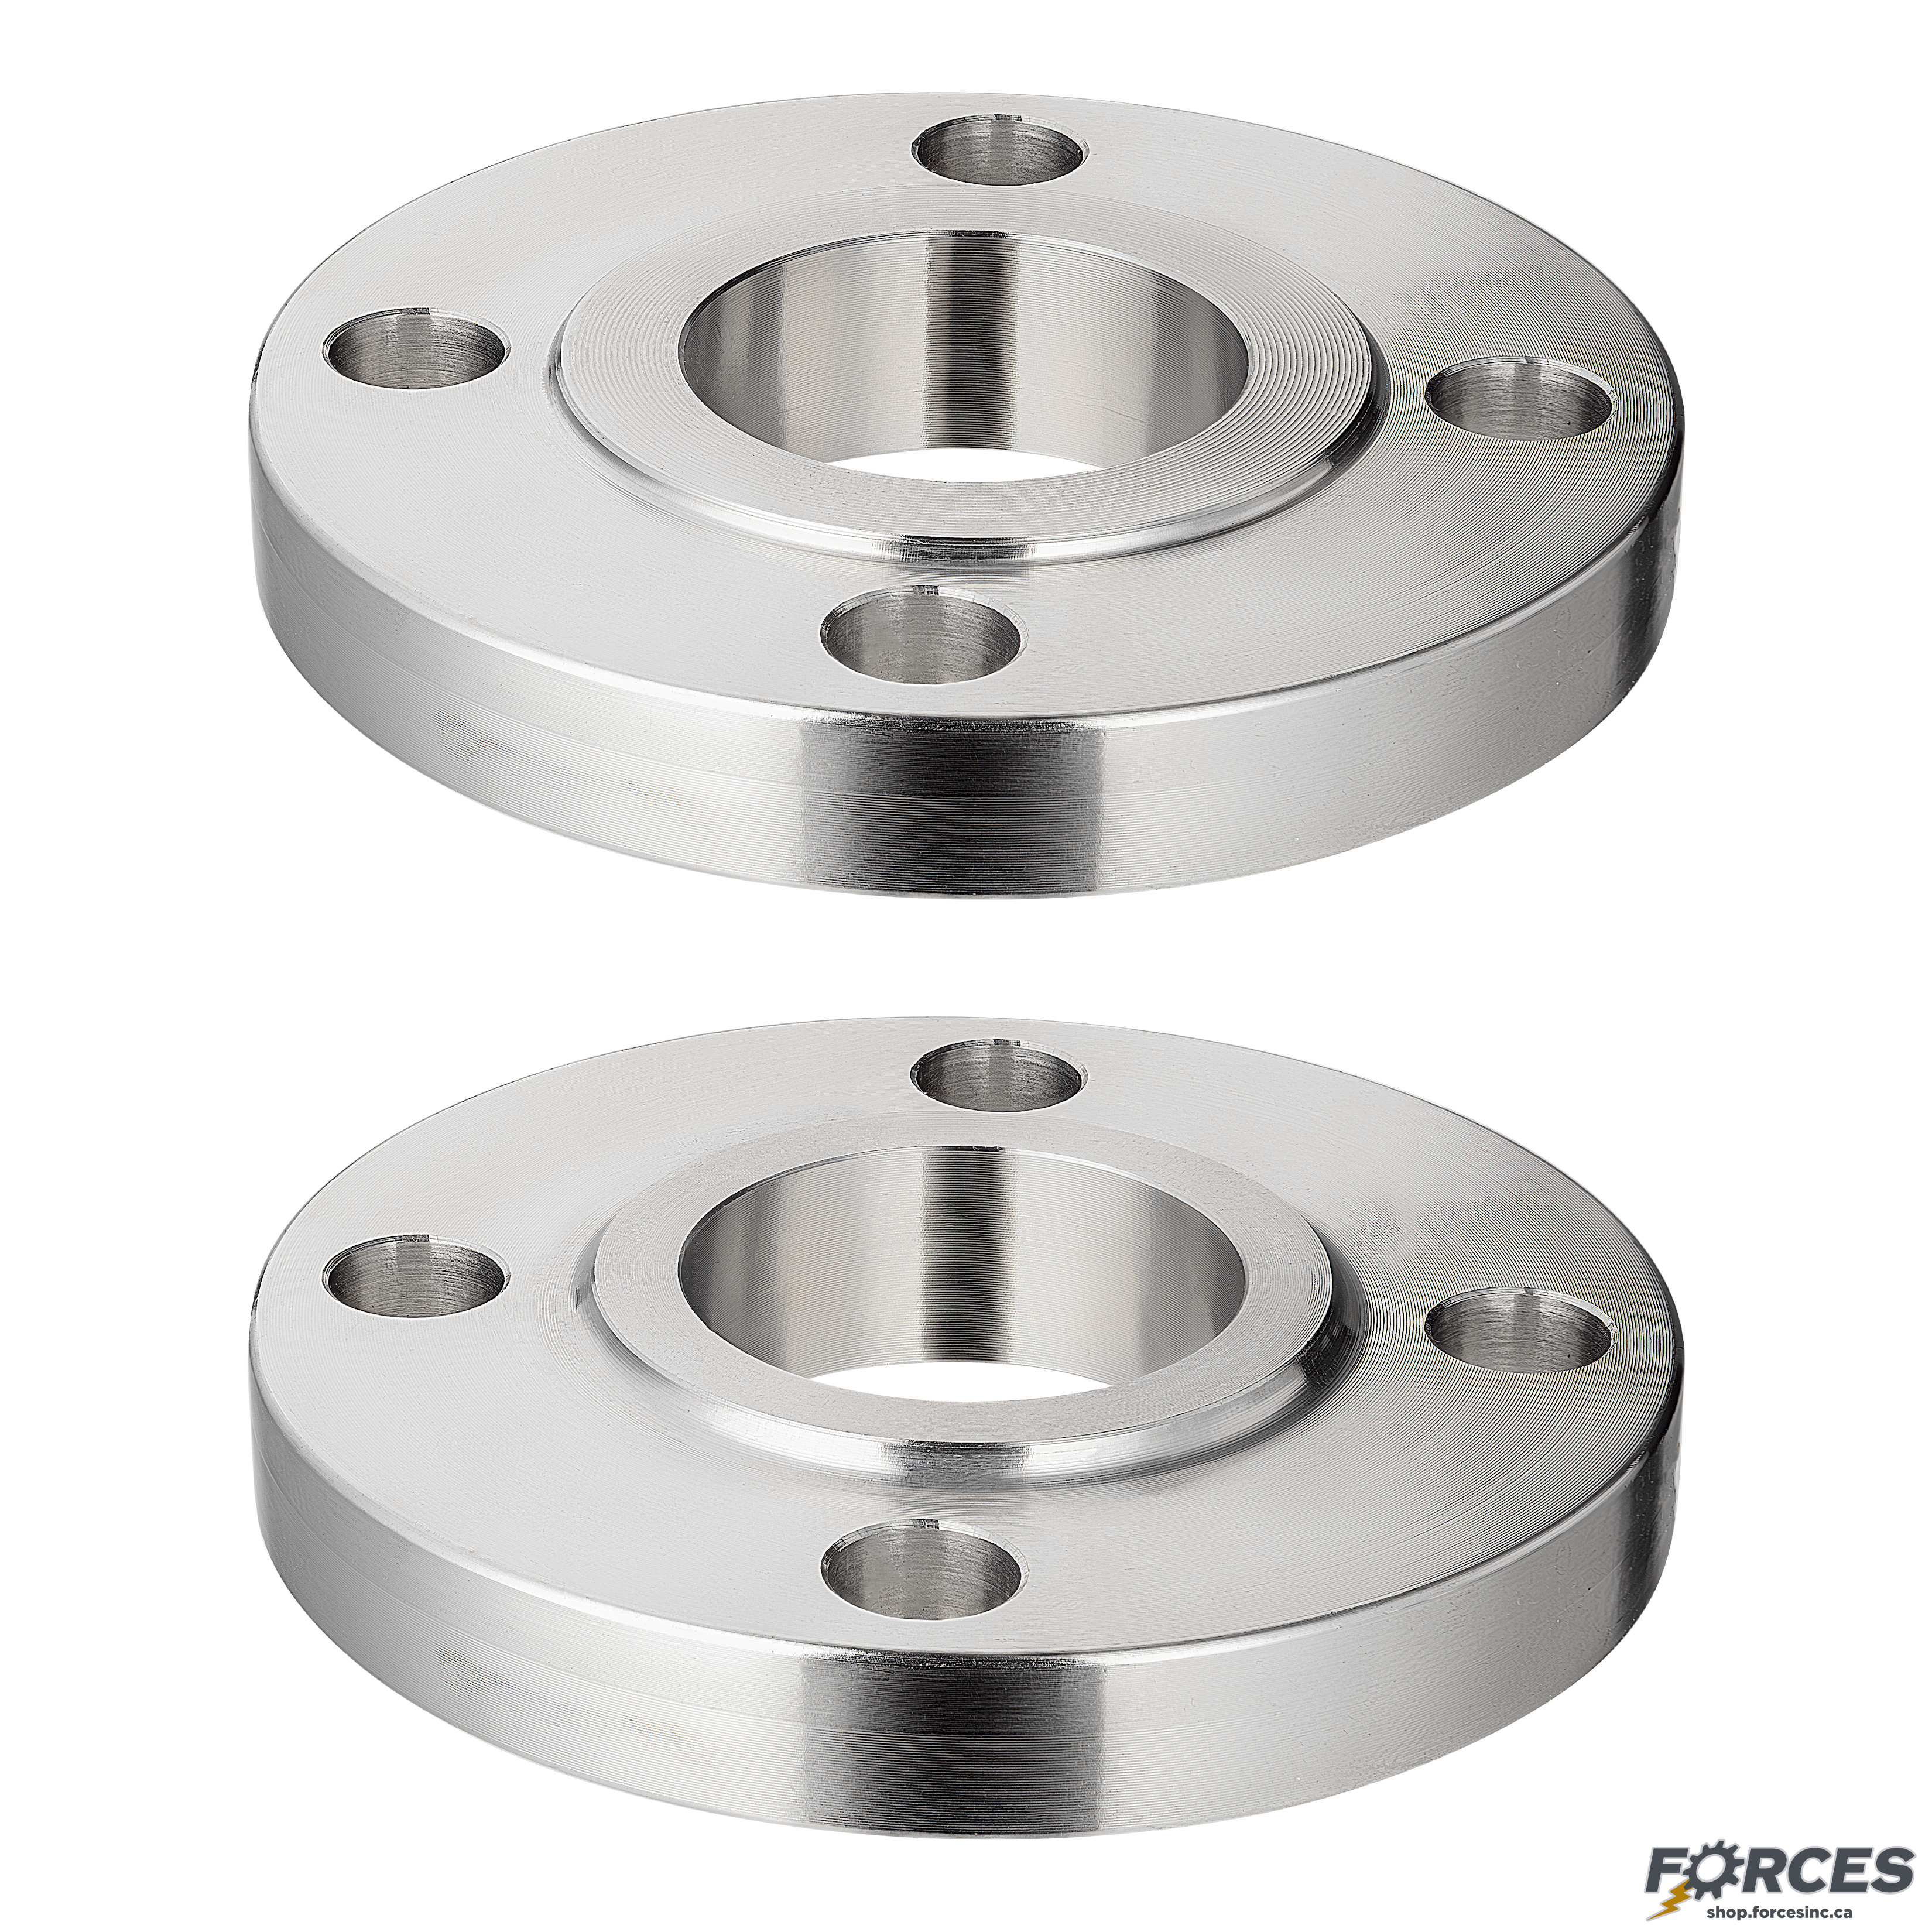 2-1/2" Slip-On Flange Class #150 - Stainless Steel 316 - Forces Inc